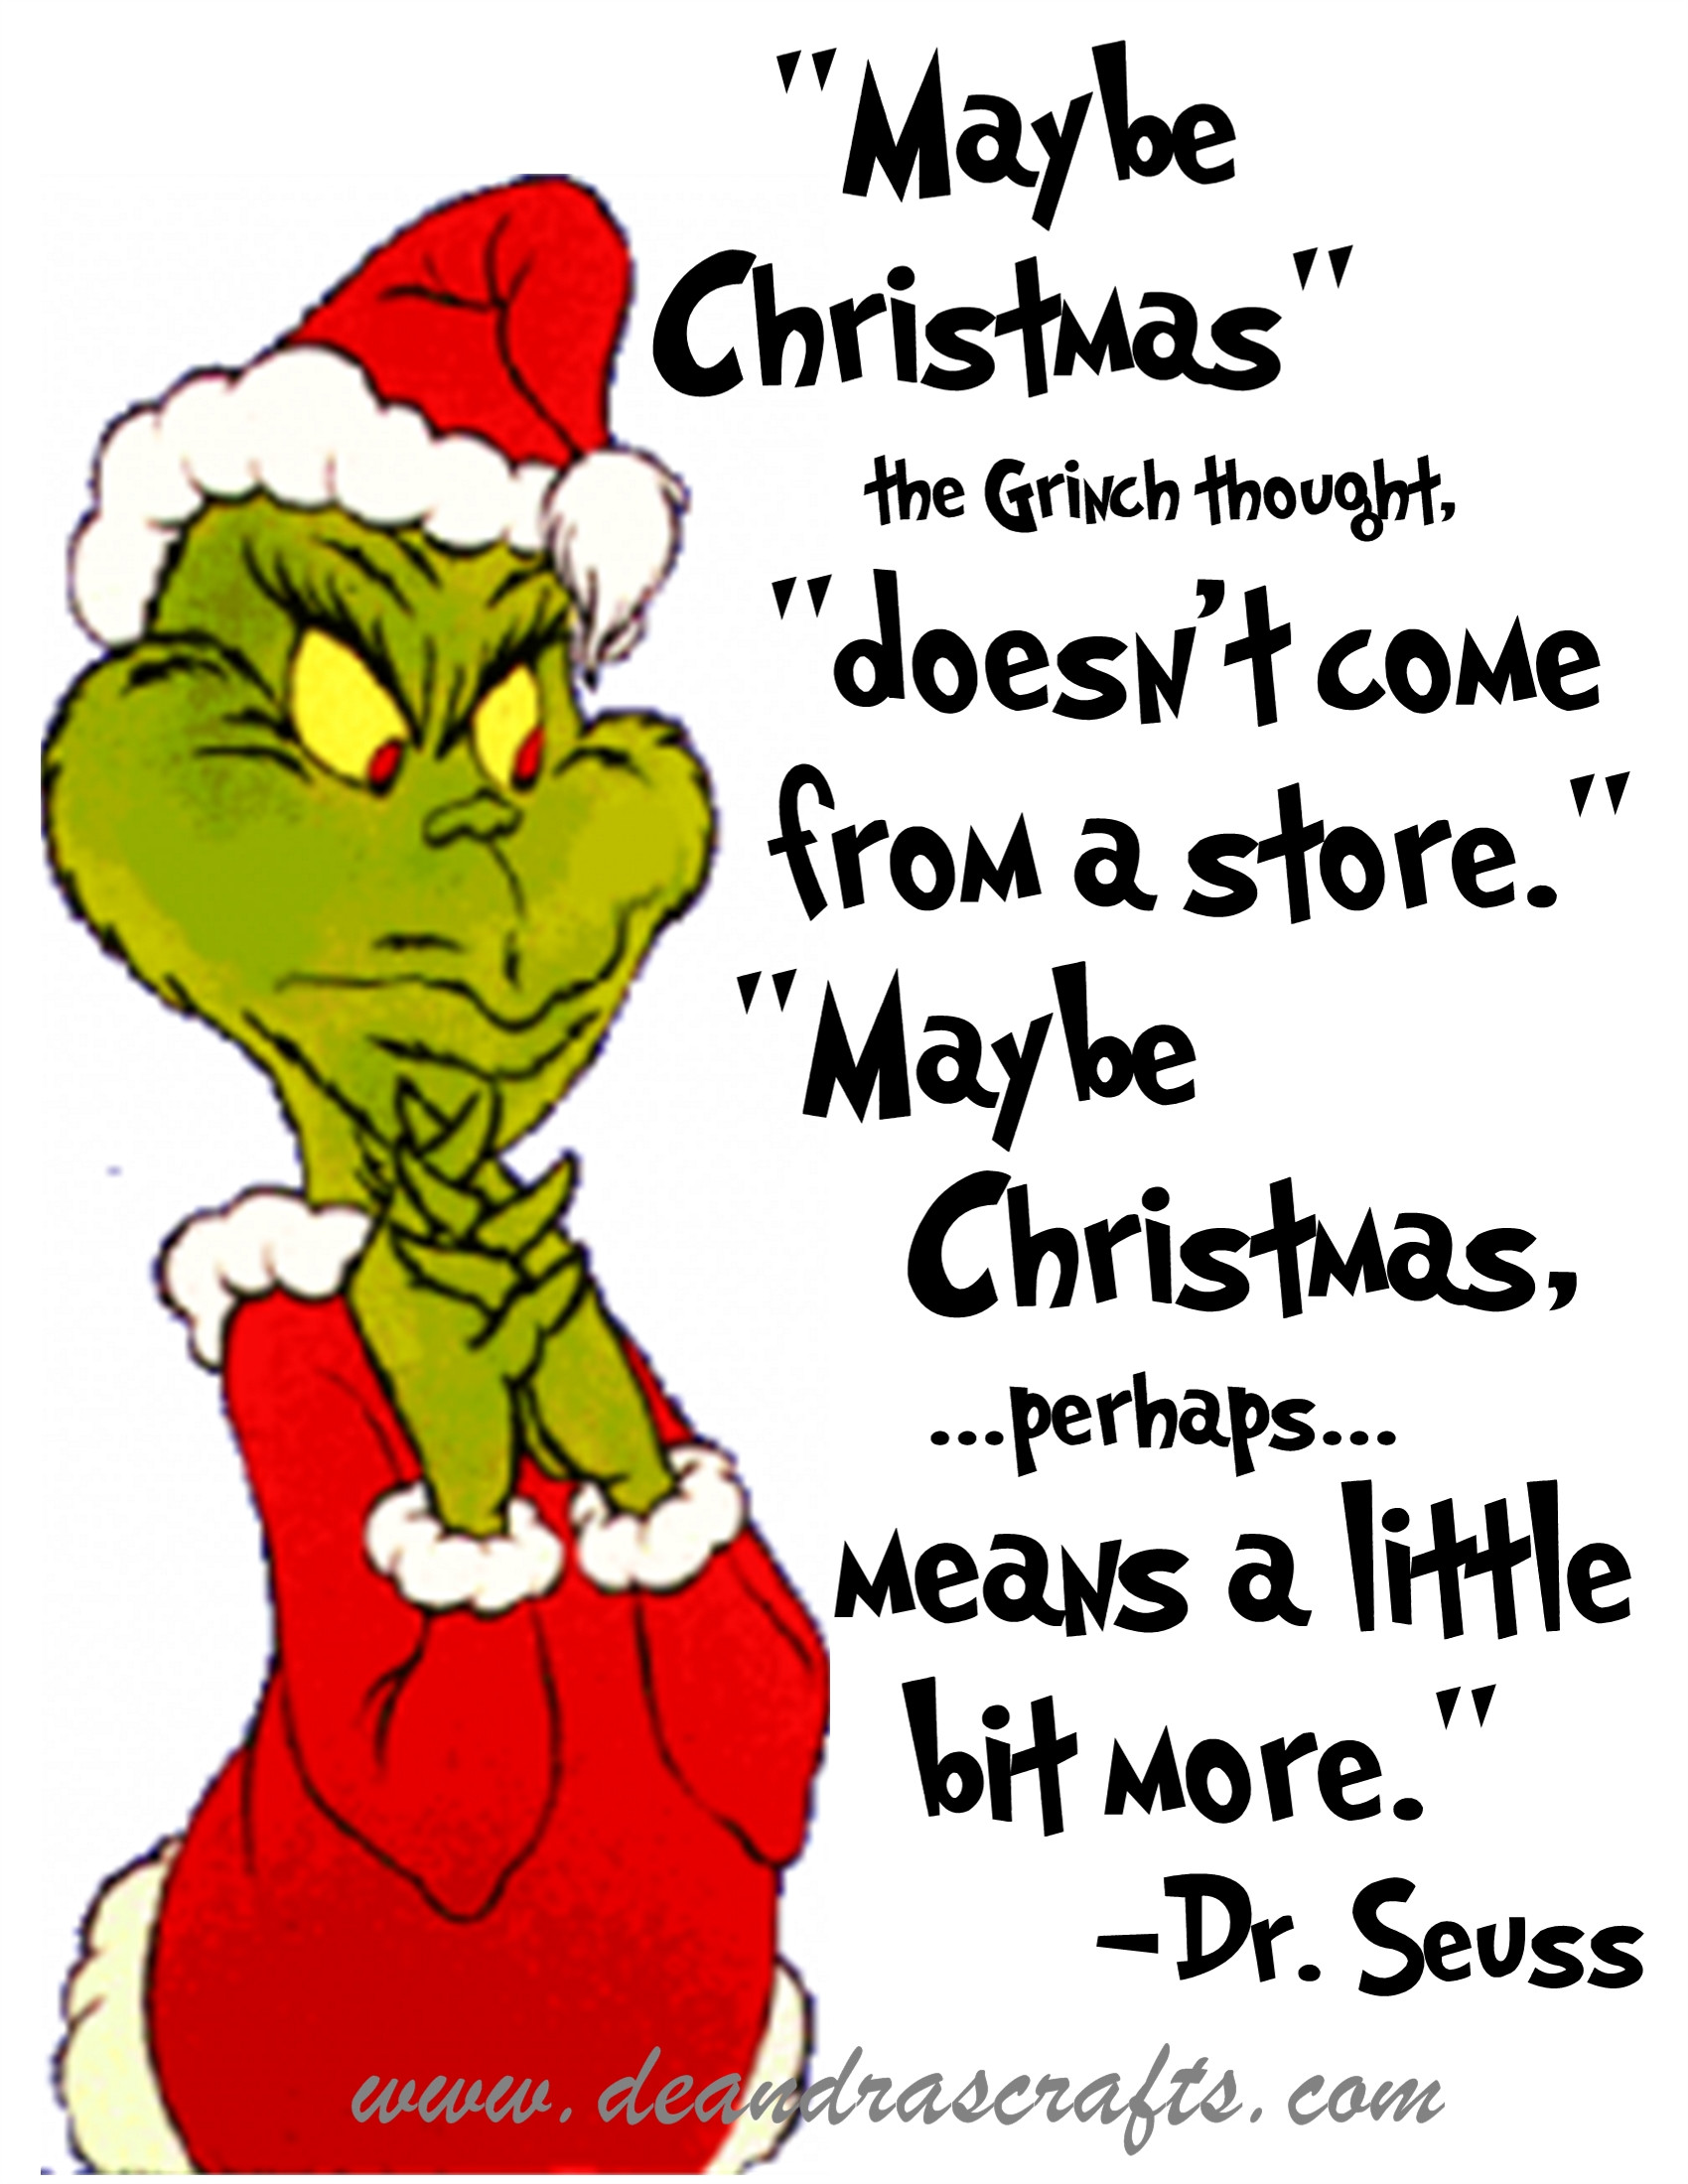 Christmas Quote From The Grinch
 The Top 5 Christmas Movies You Need To Watch This Holiday